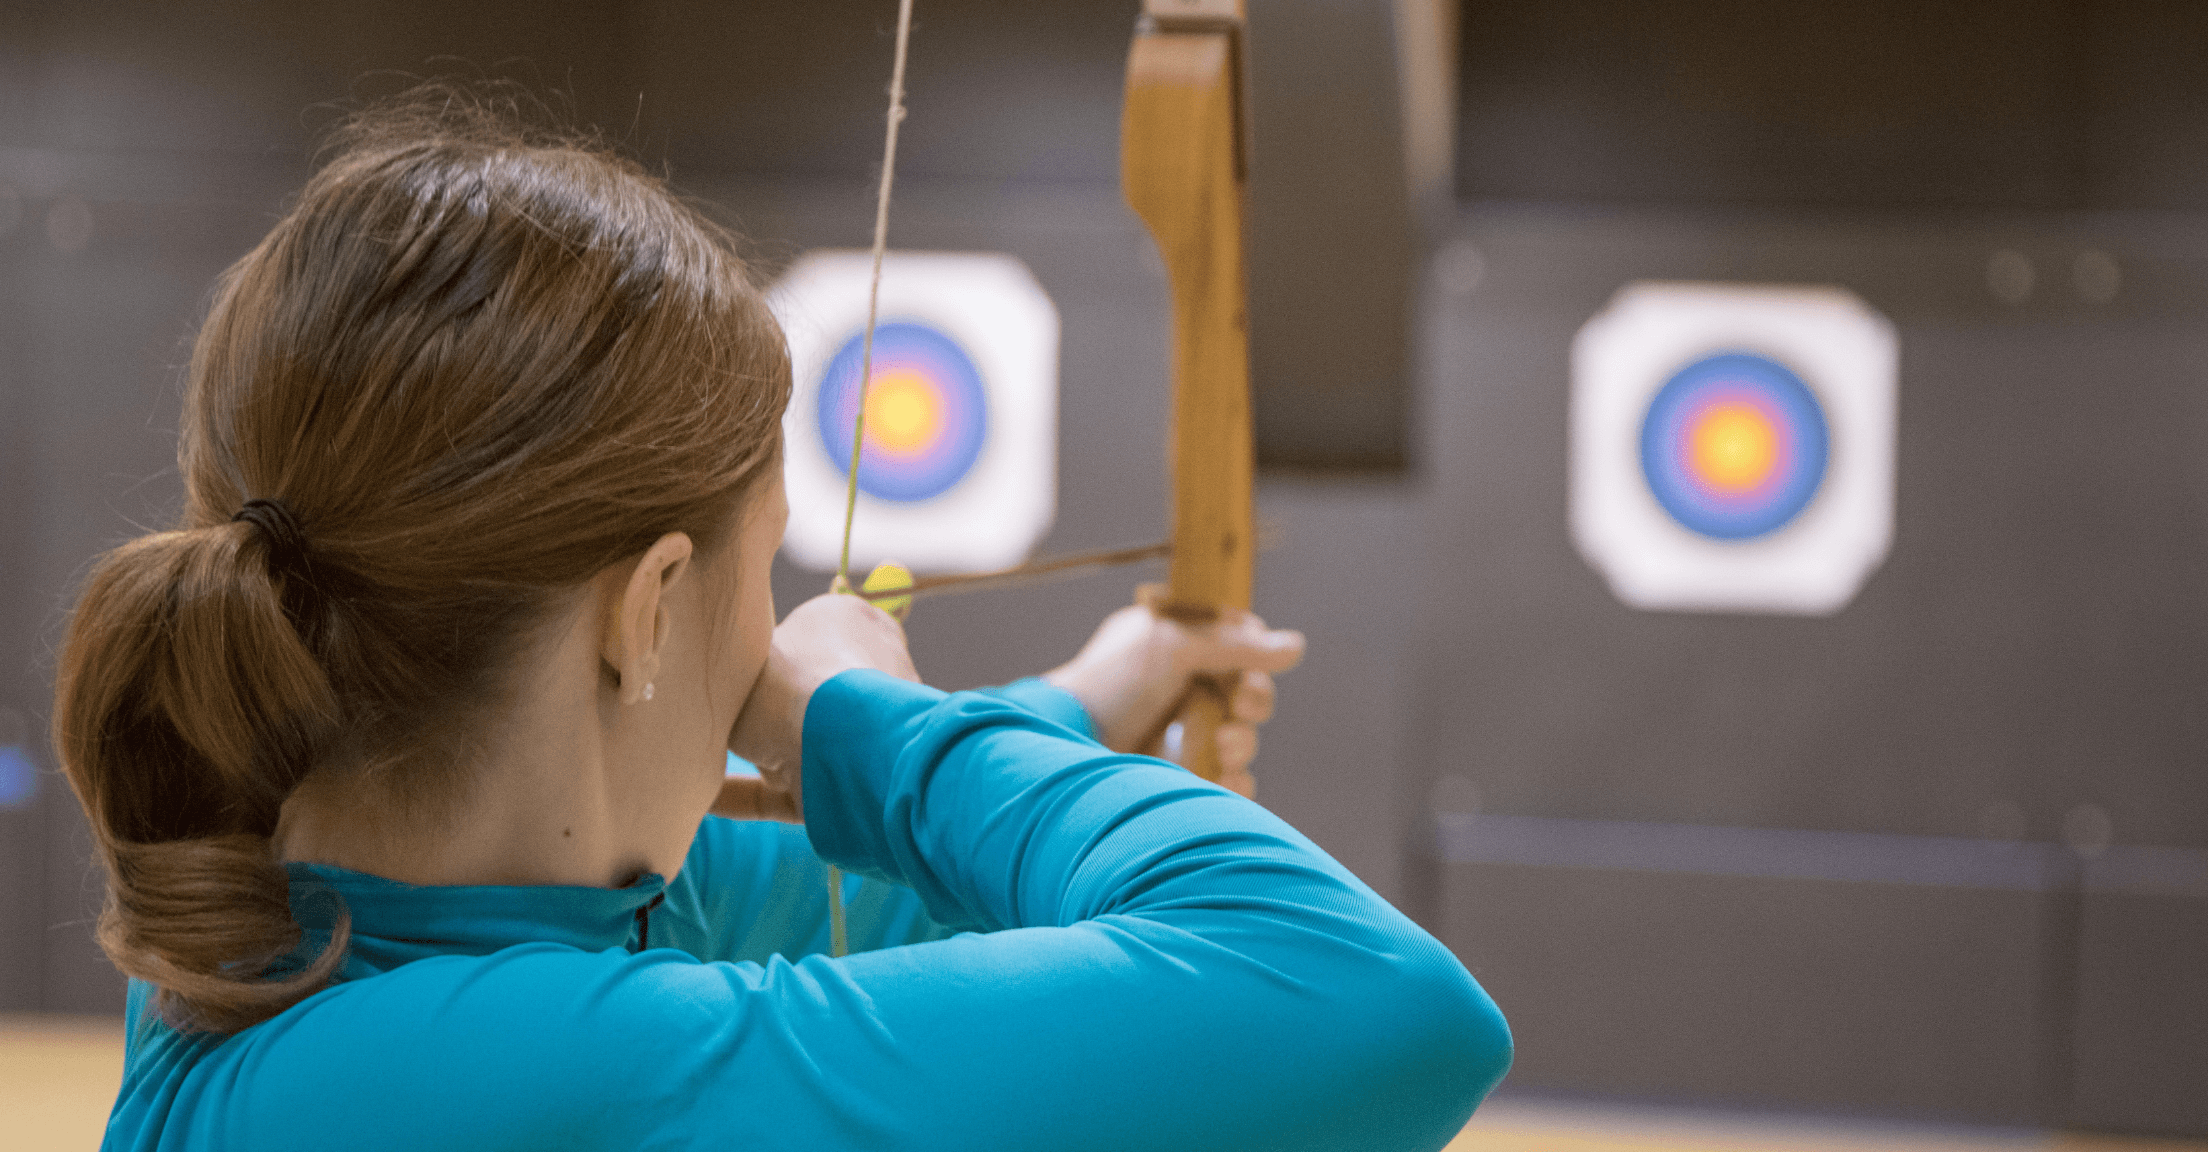 Woman shooting an arrow from a bow at targets